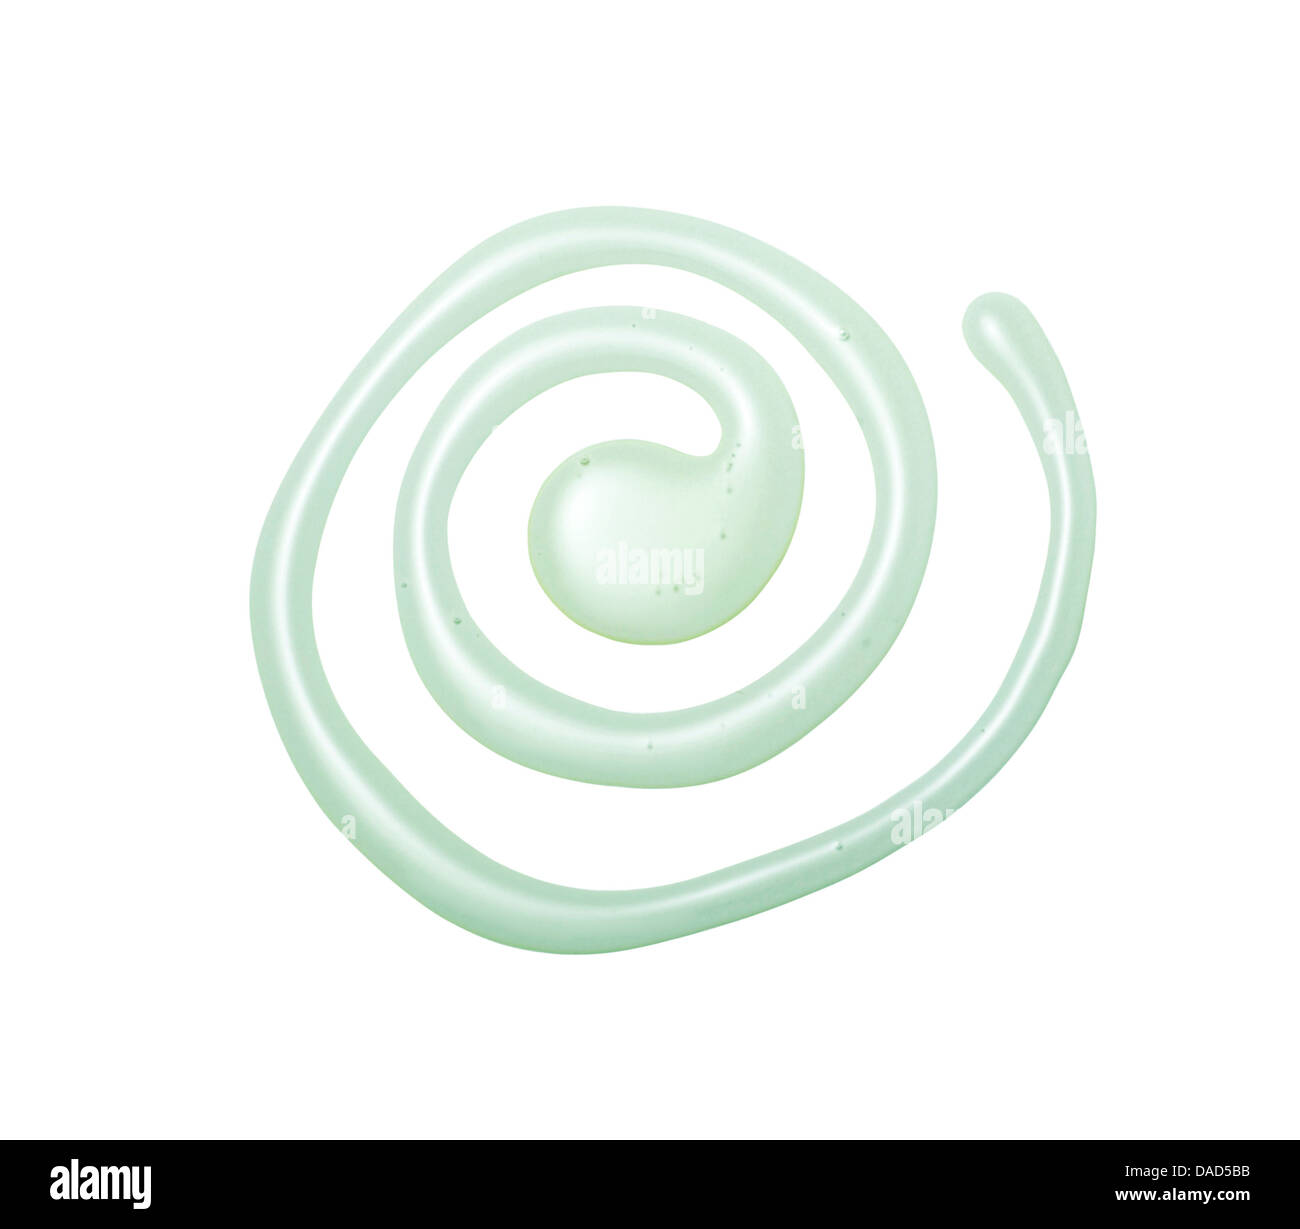 green beauty cream swirl gel cut out onto a white background Stock Photo